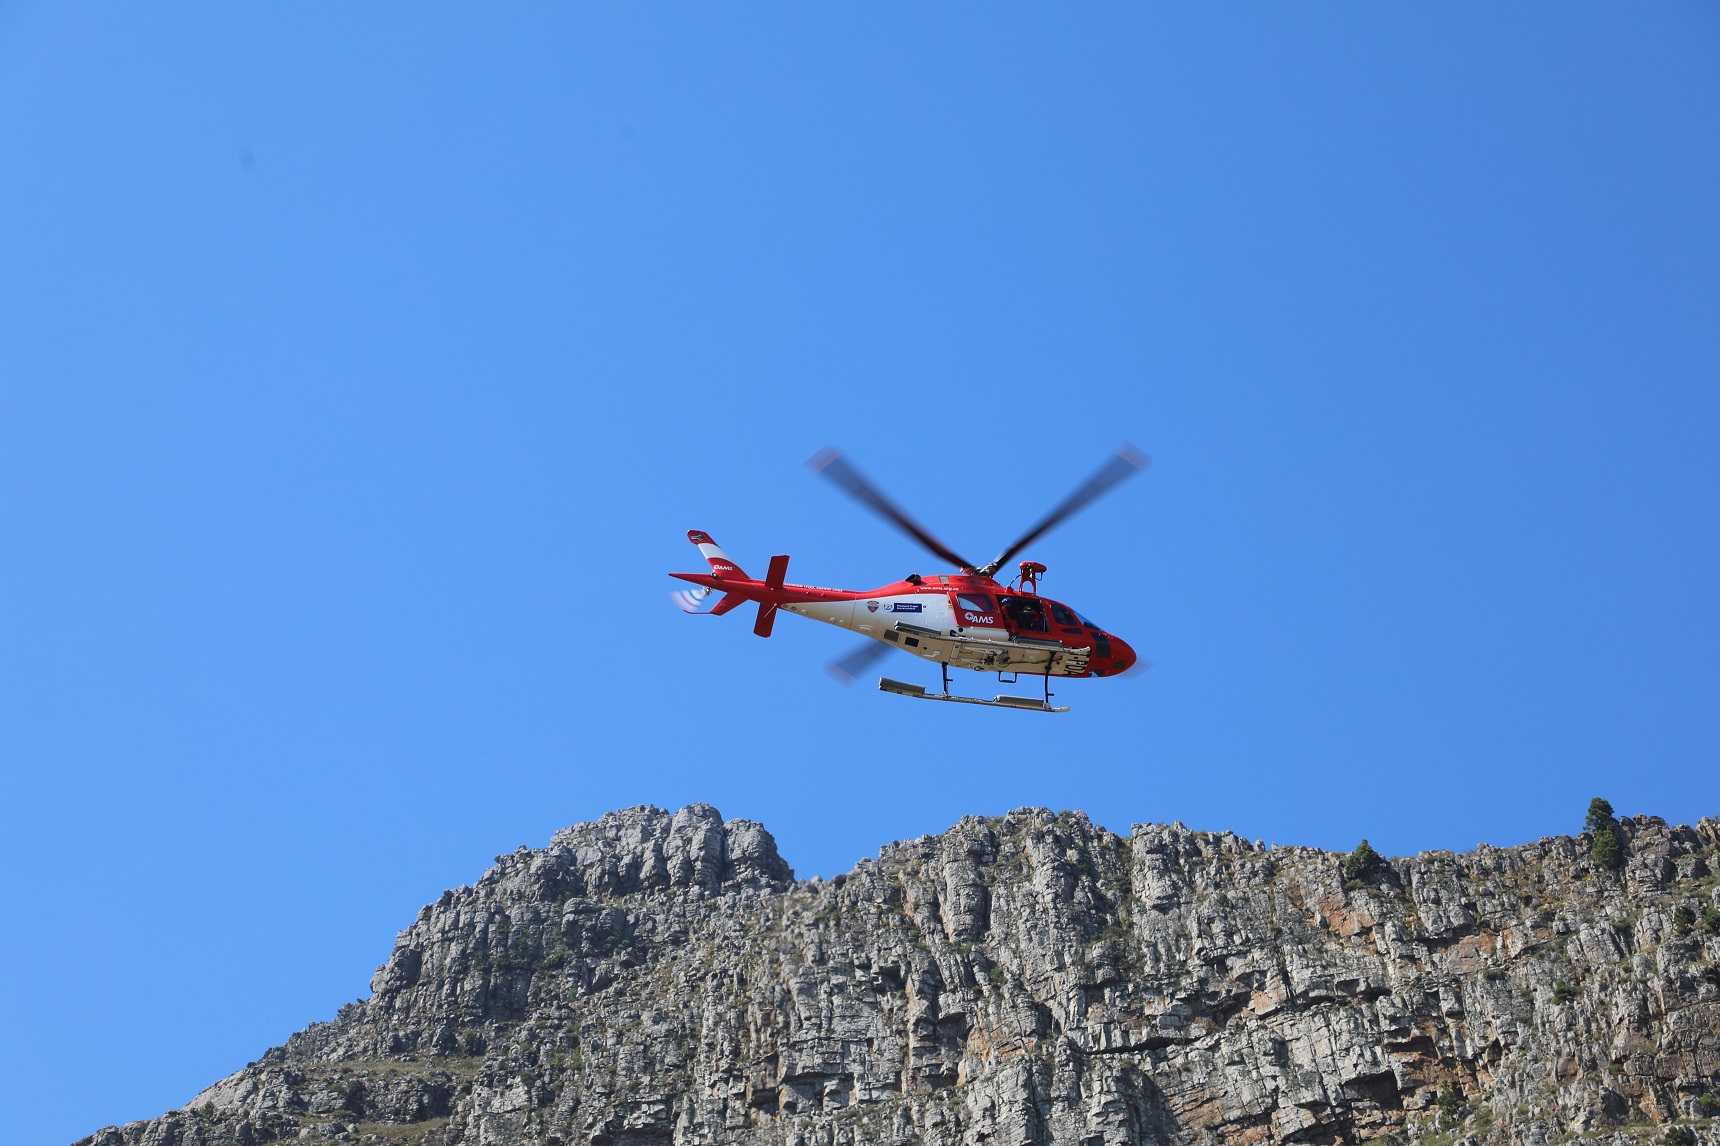 AMS’s helicopter performing its duties during the mountain exercise.